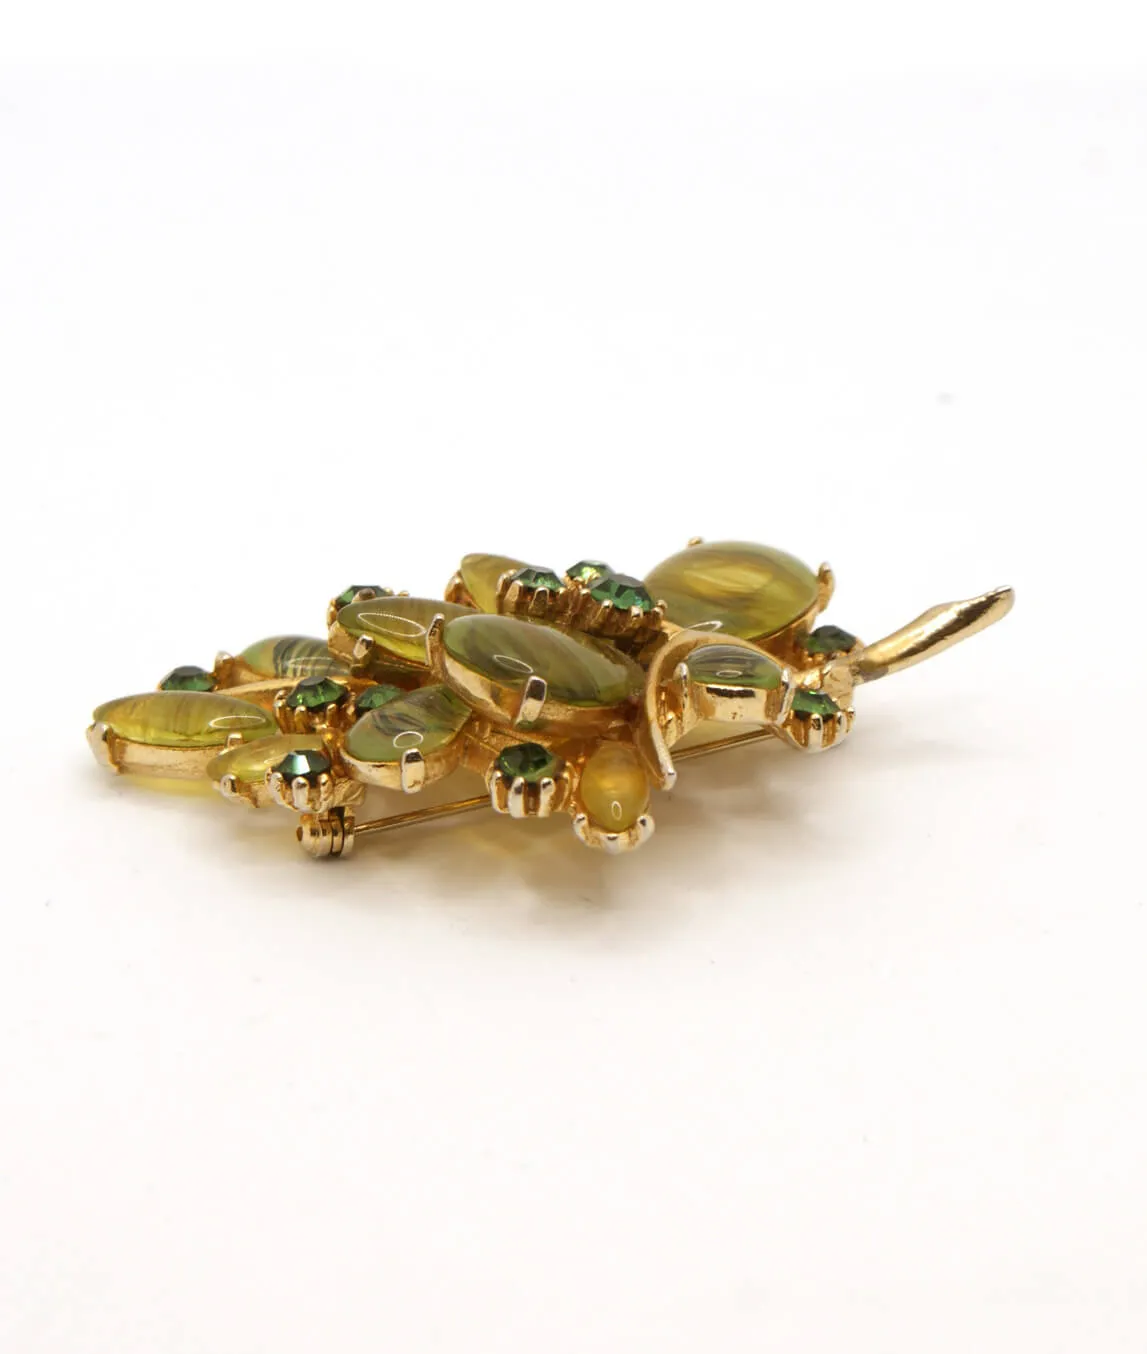 Vintage ART brooch with green stones side profile